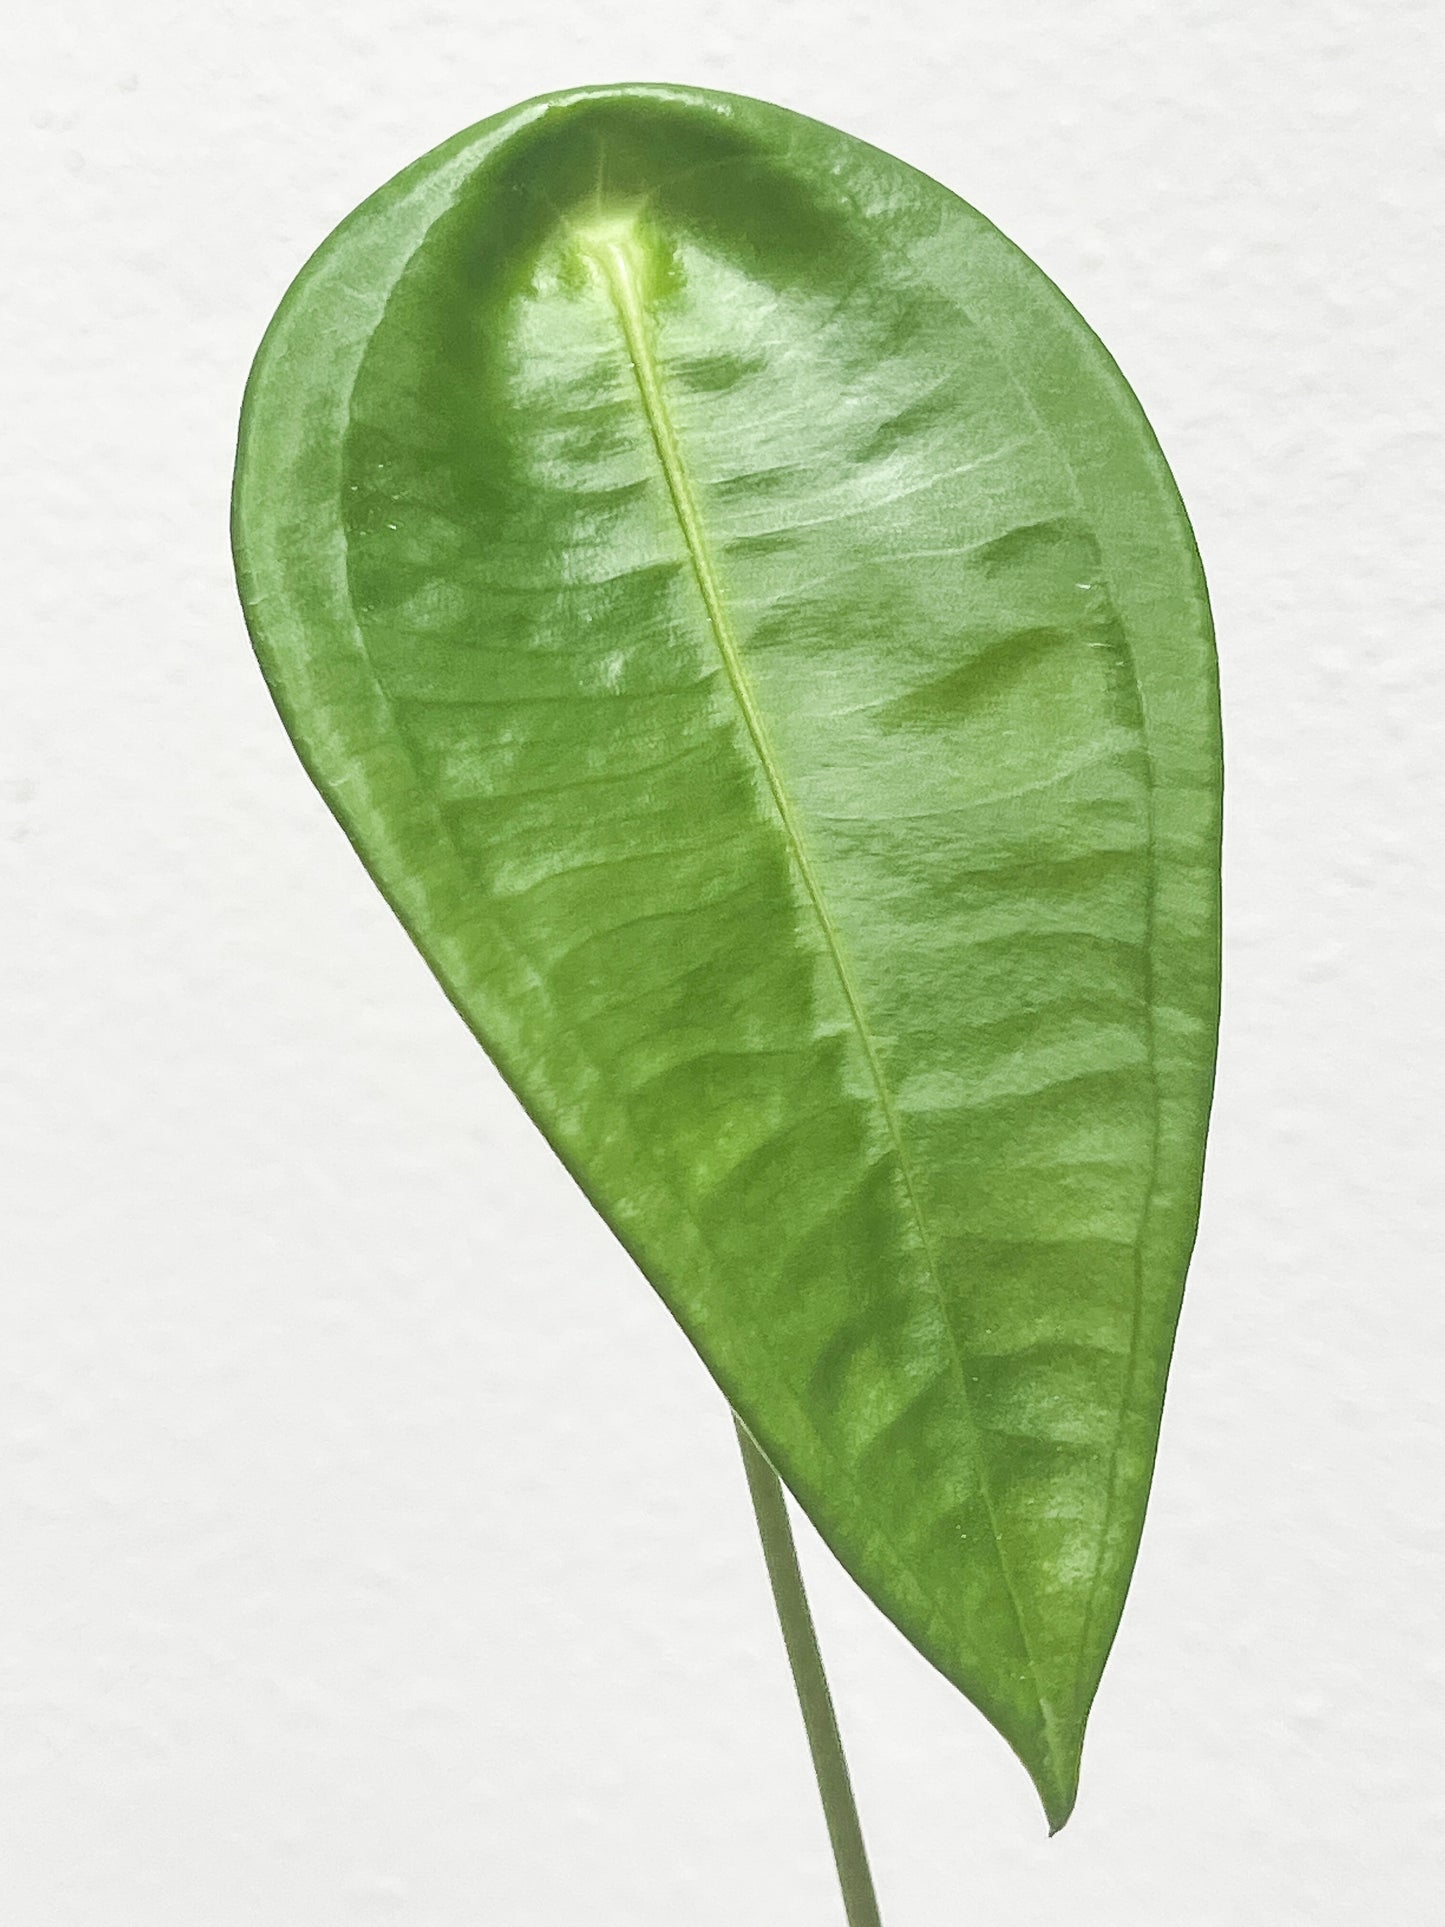 Anthurium peltigerum Unrooted chonk   (First photo is the mother plant, which is not included in this sale)